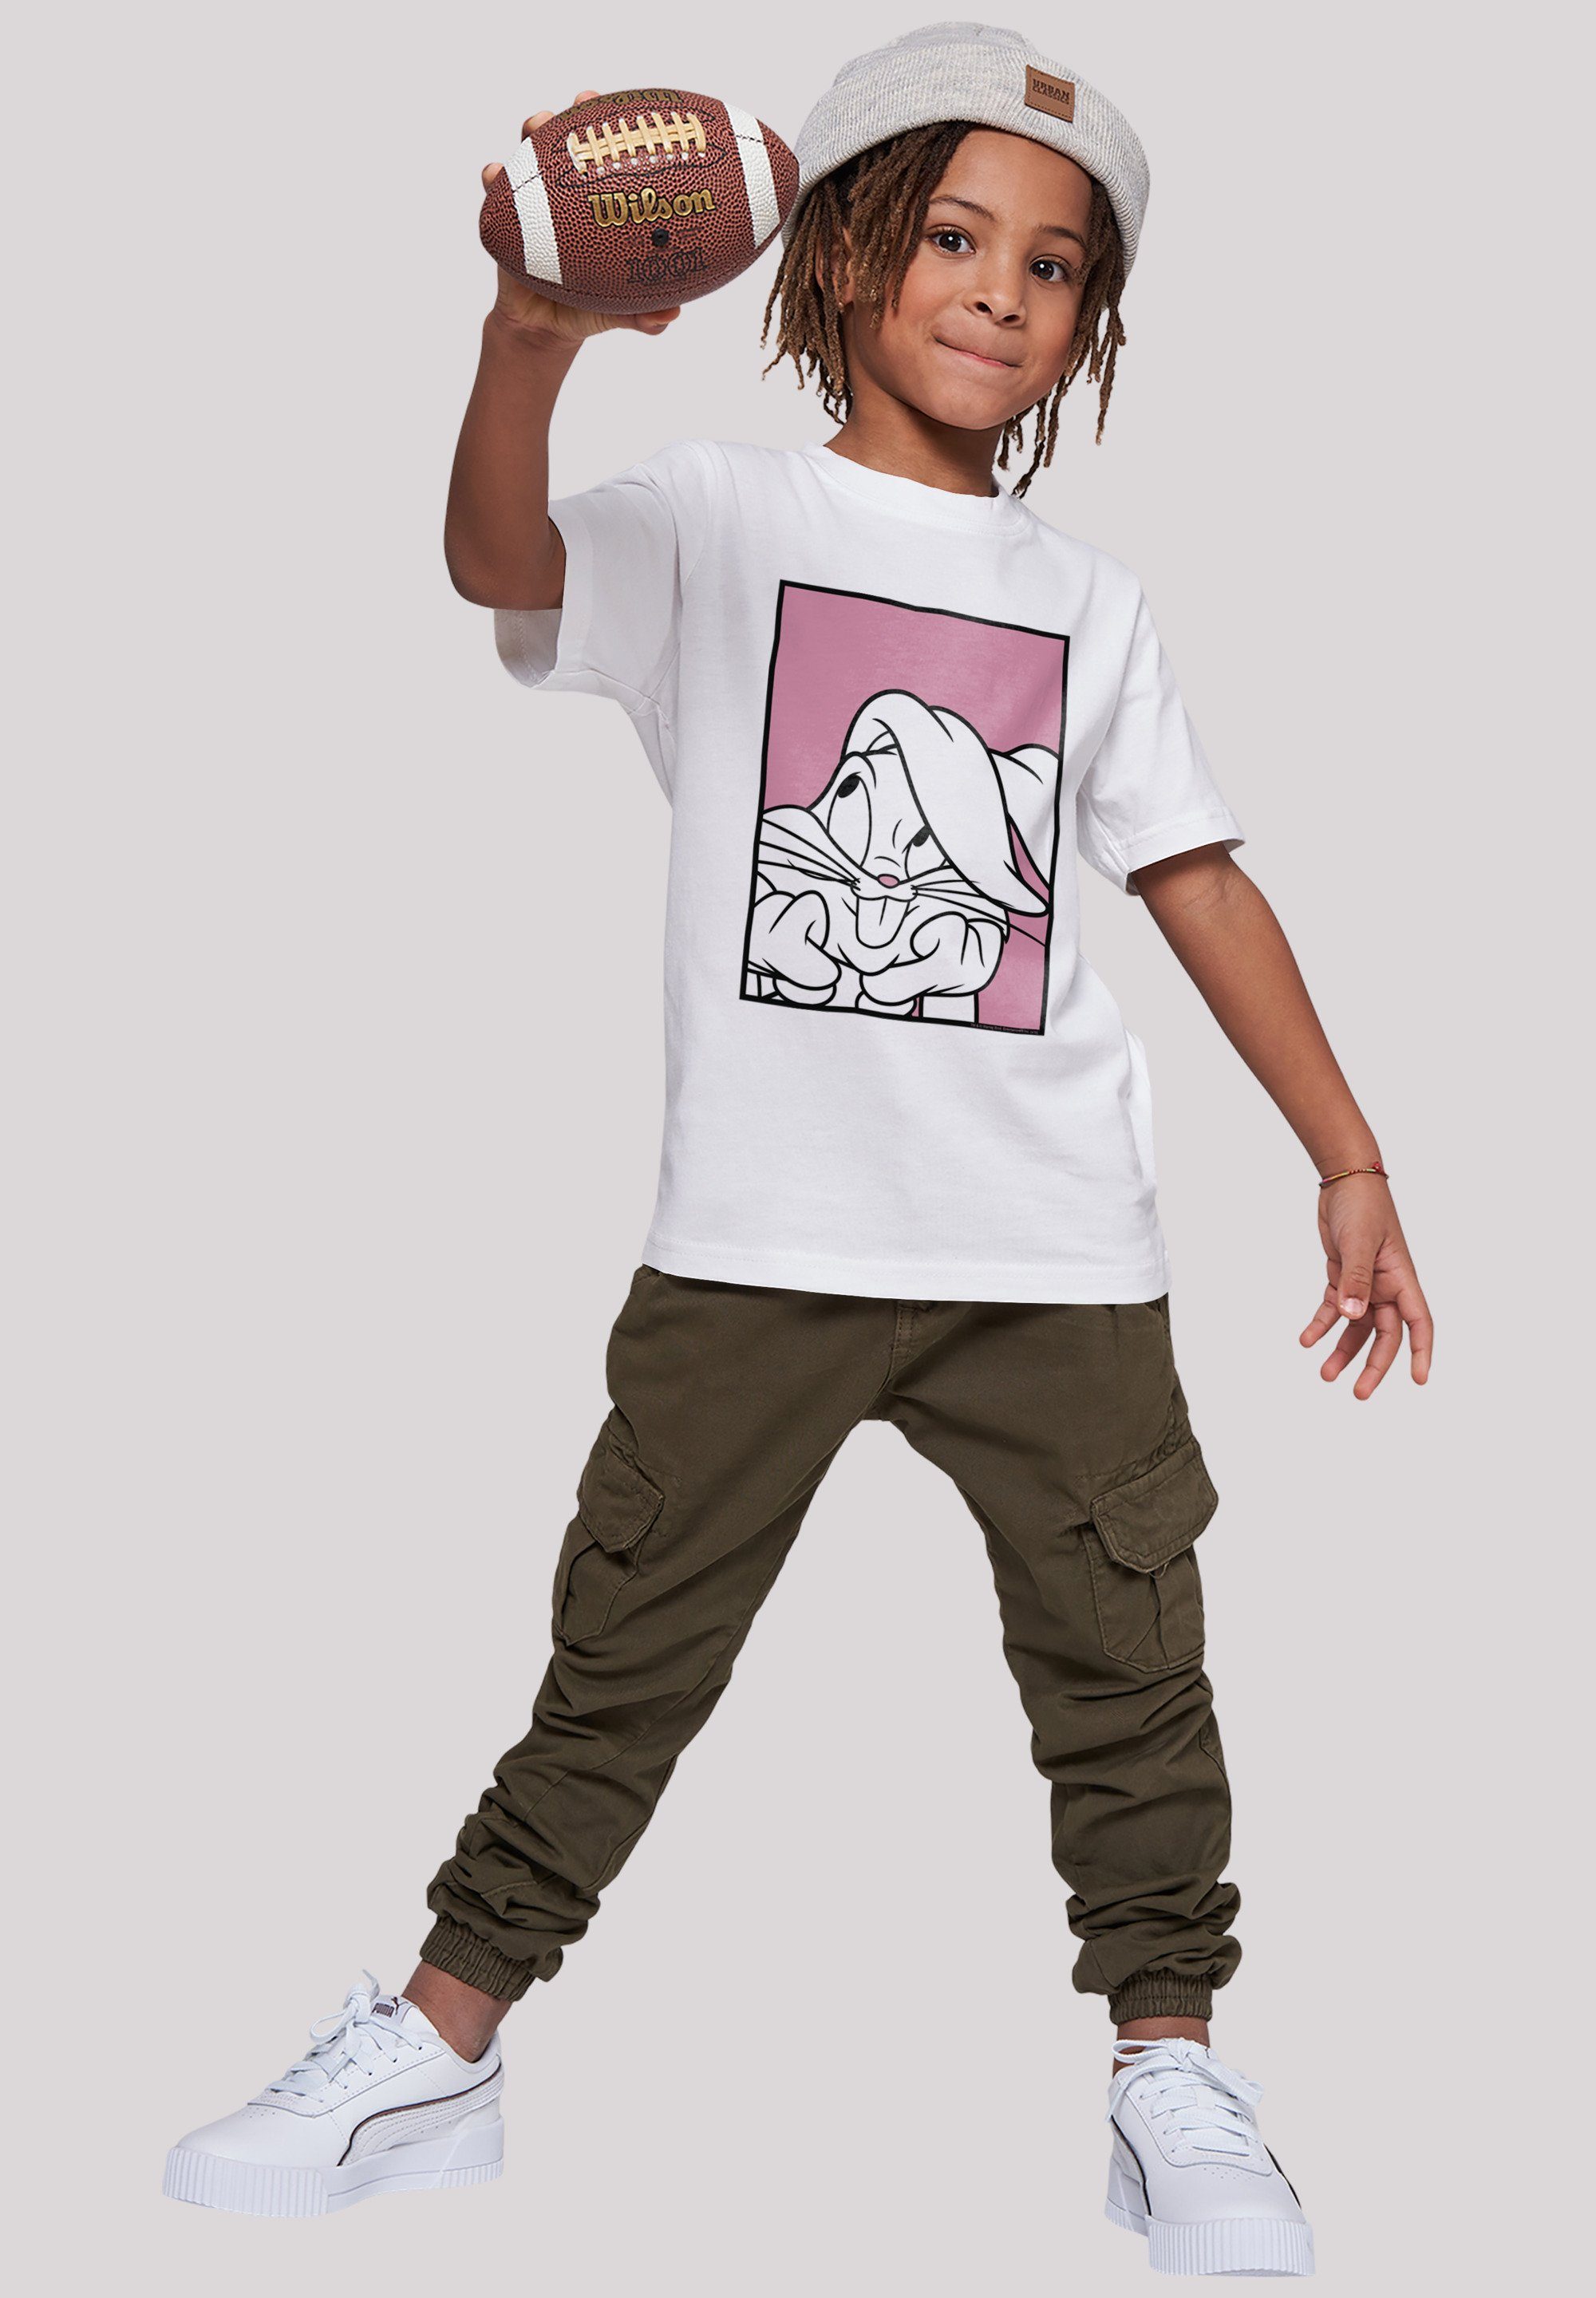 Adore-WHT Looney Bunny Kurzarmshirt Kinder Basic (1-tlg) Kids Tee with Tunes Bugs F4NT4STIC white